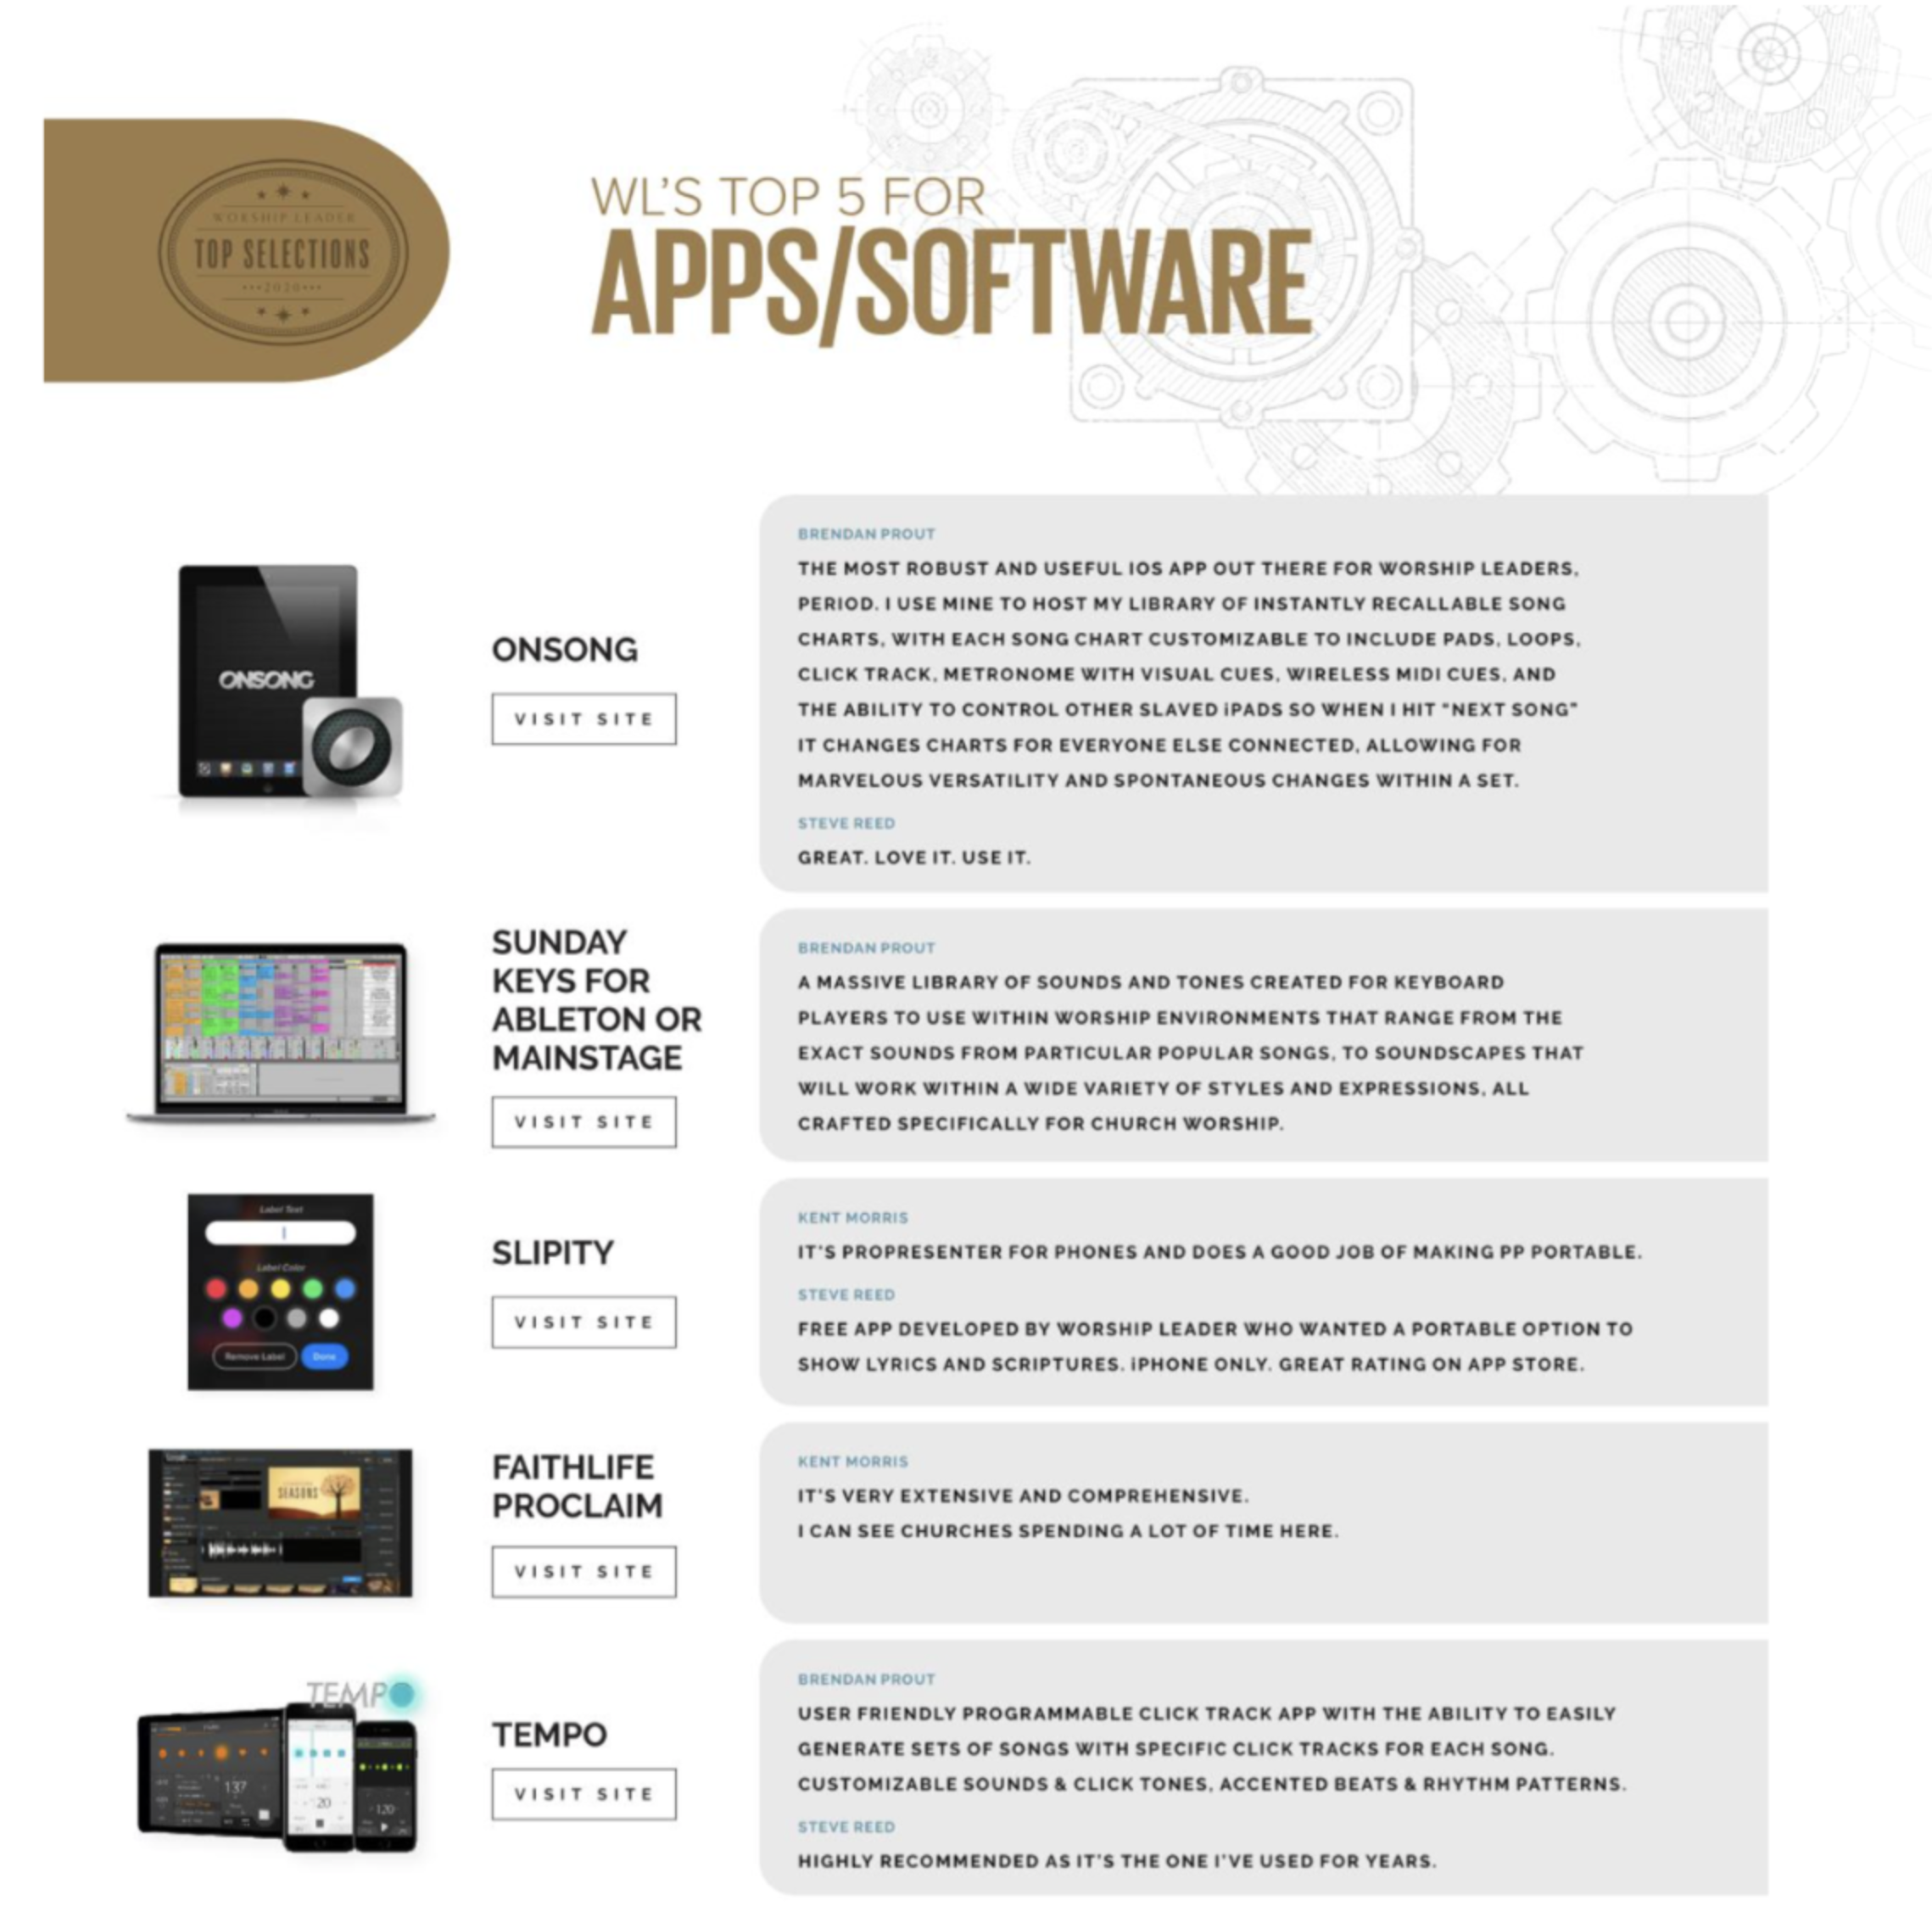 Sunday Keys is a Top Five App/Software in Worship Leader Magazine!